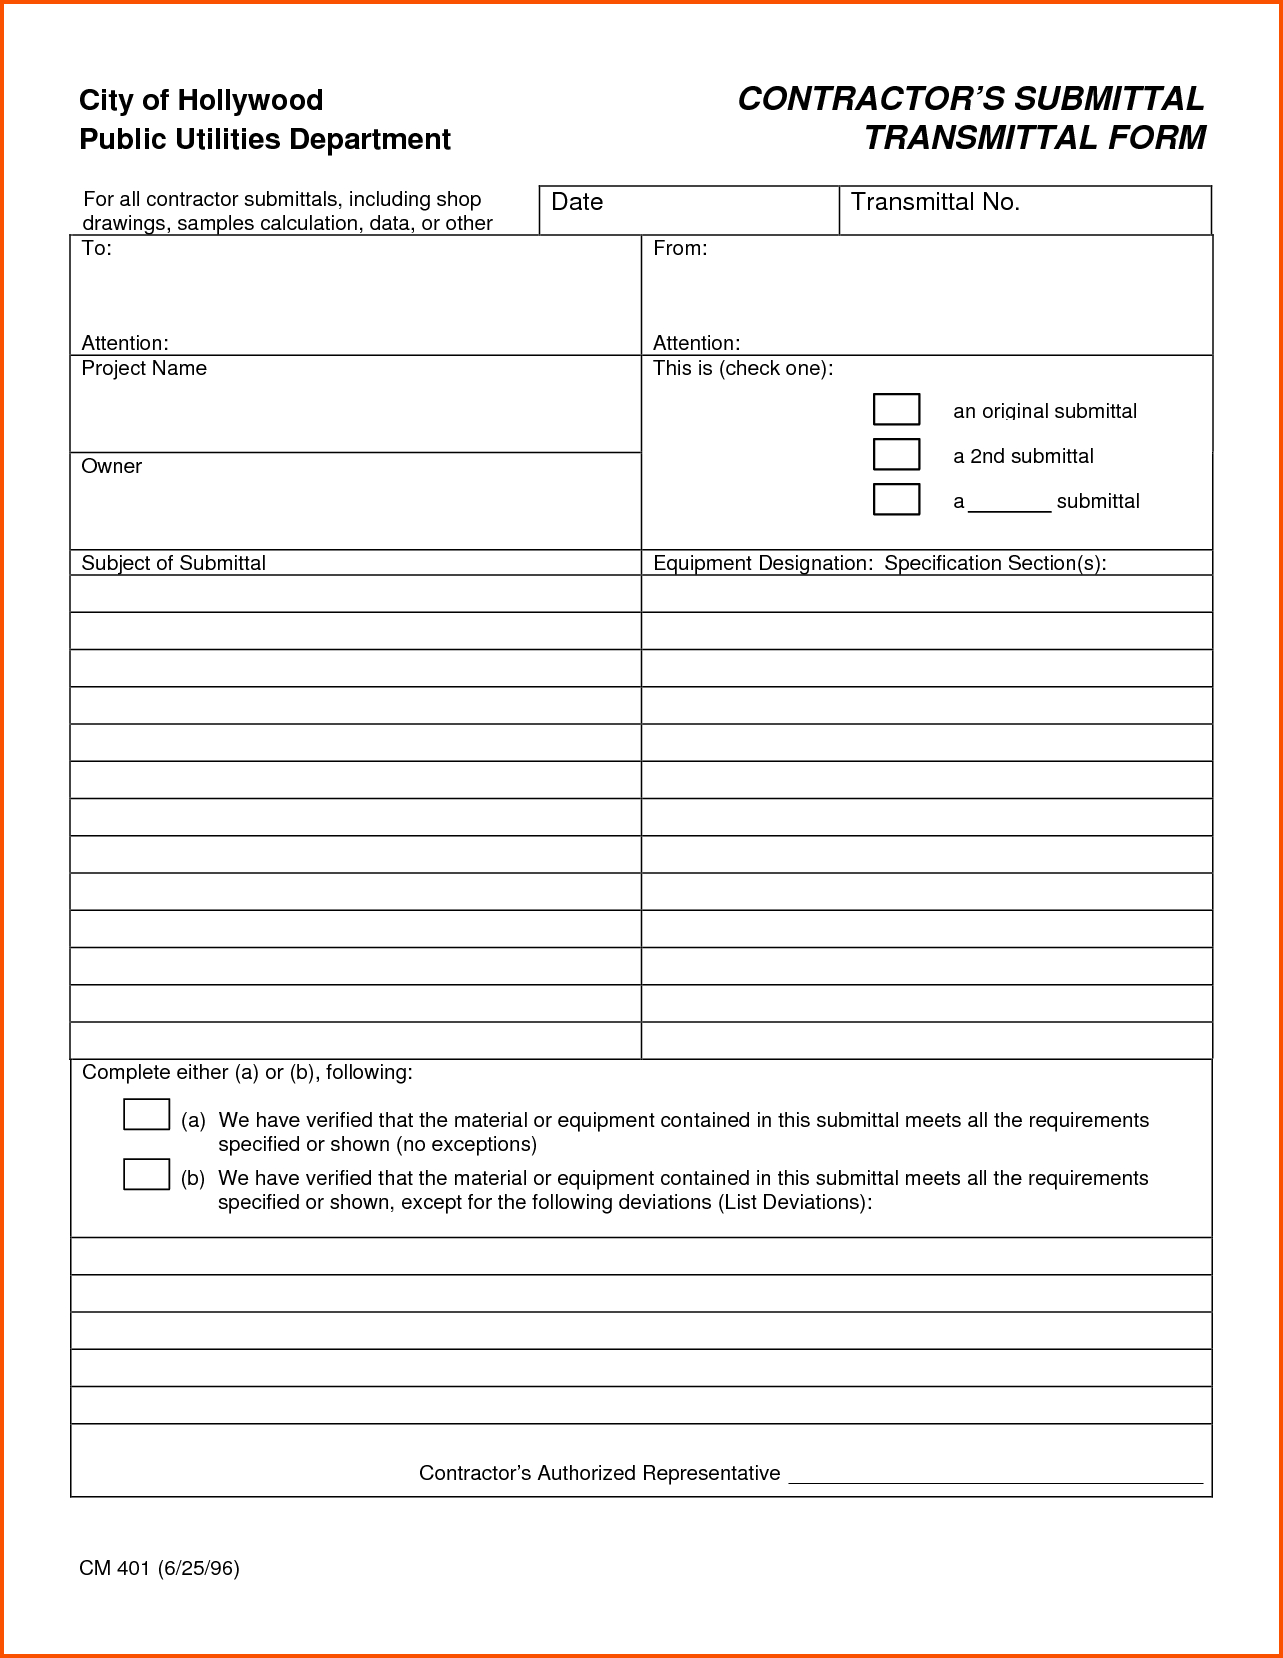 Letter Of Transmittal Template Construction - Contemporary Transmittal Sheet Template Entry Level Resume